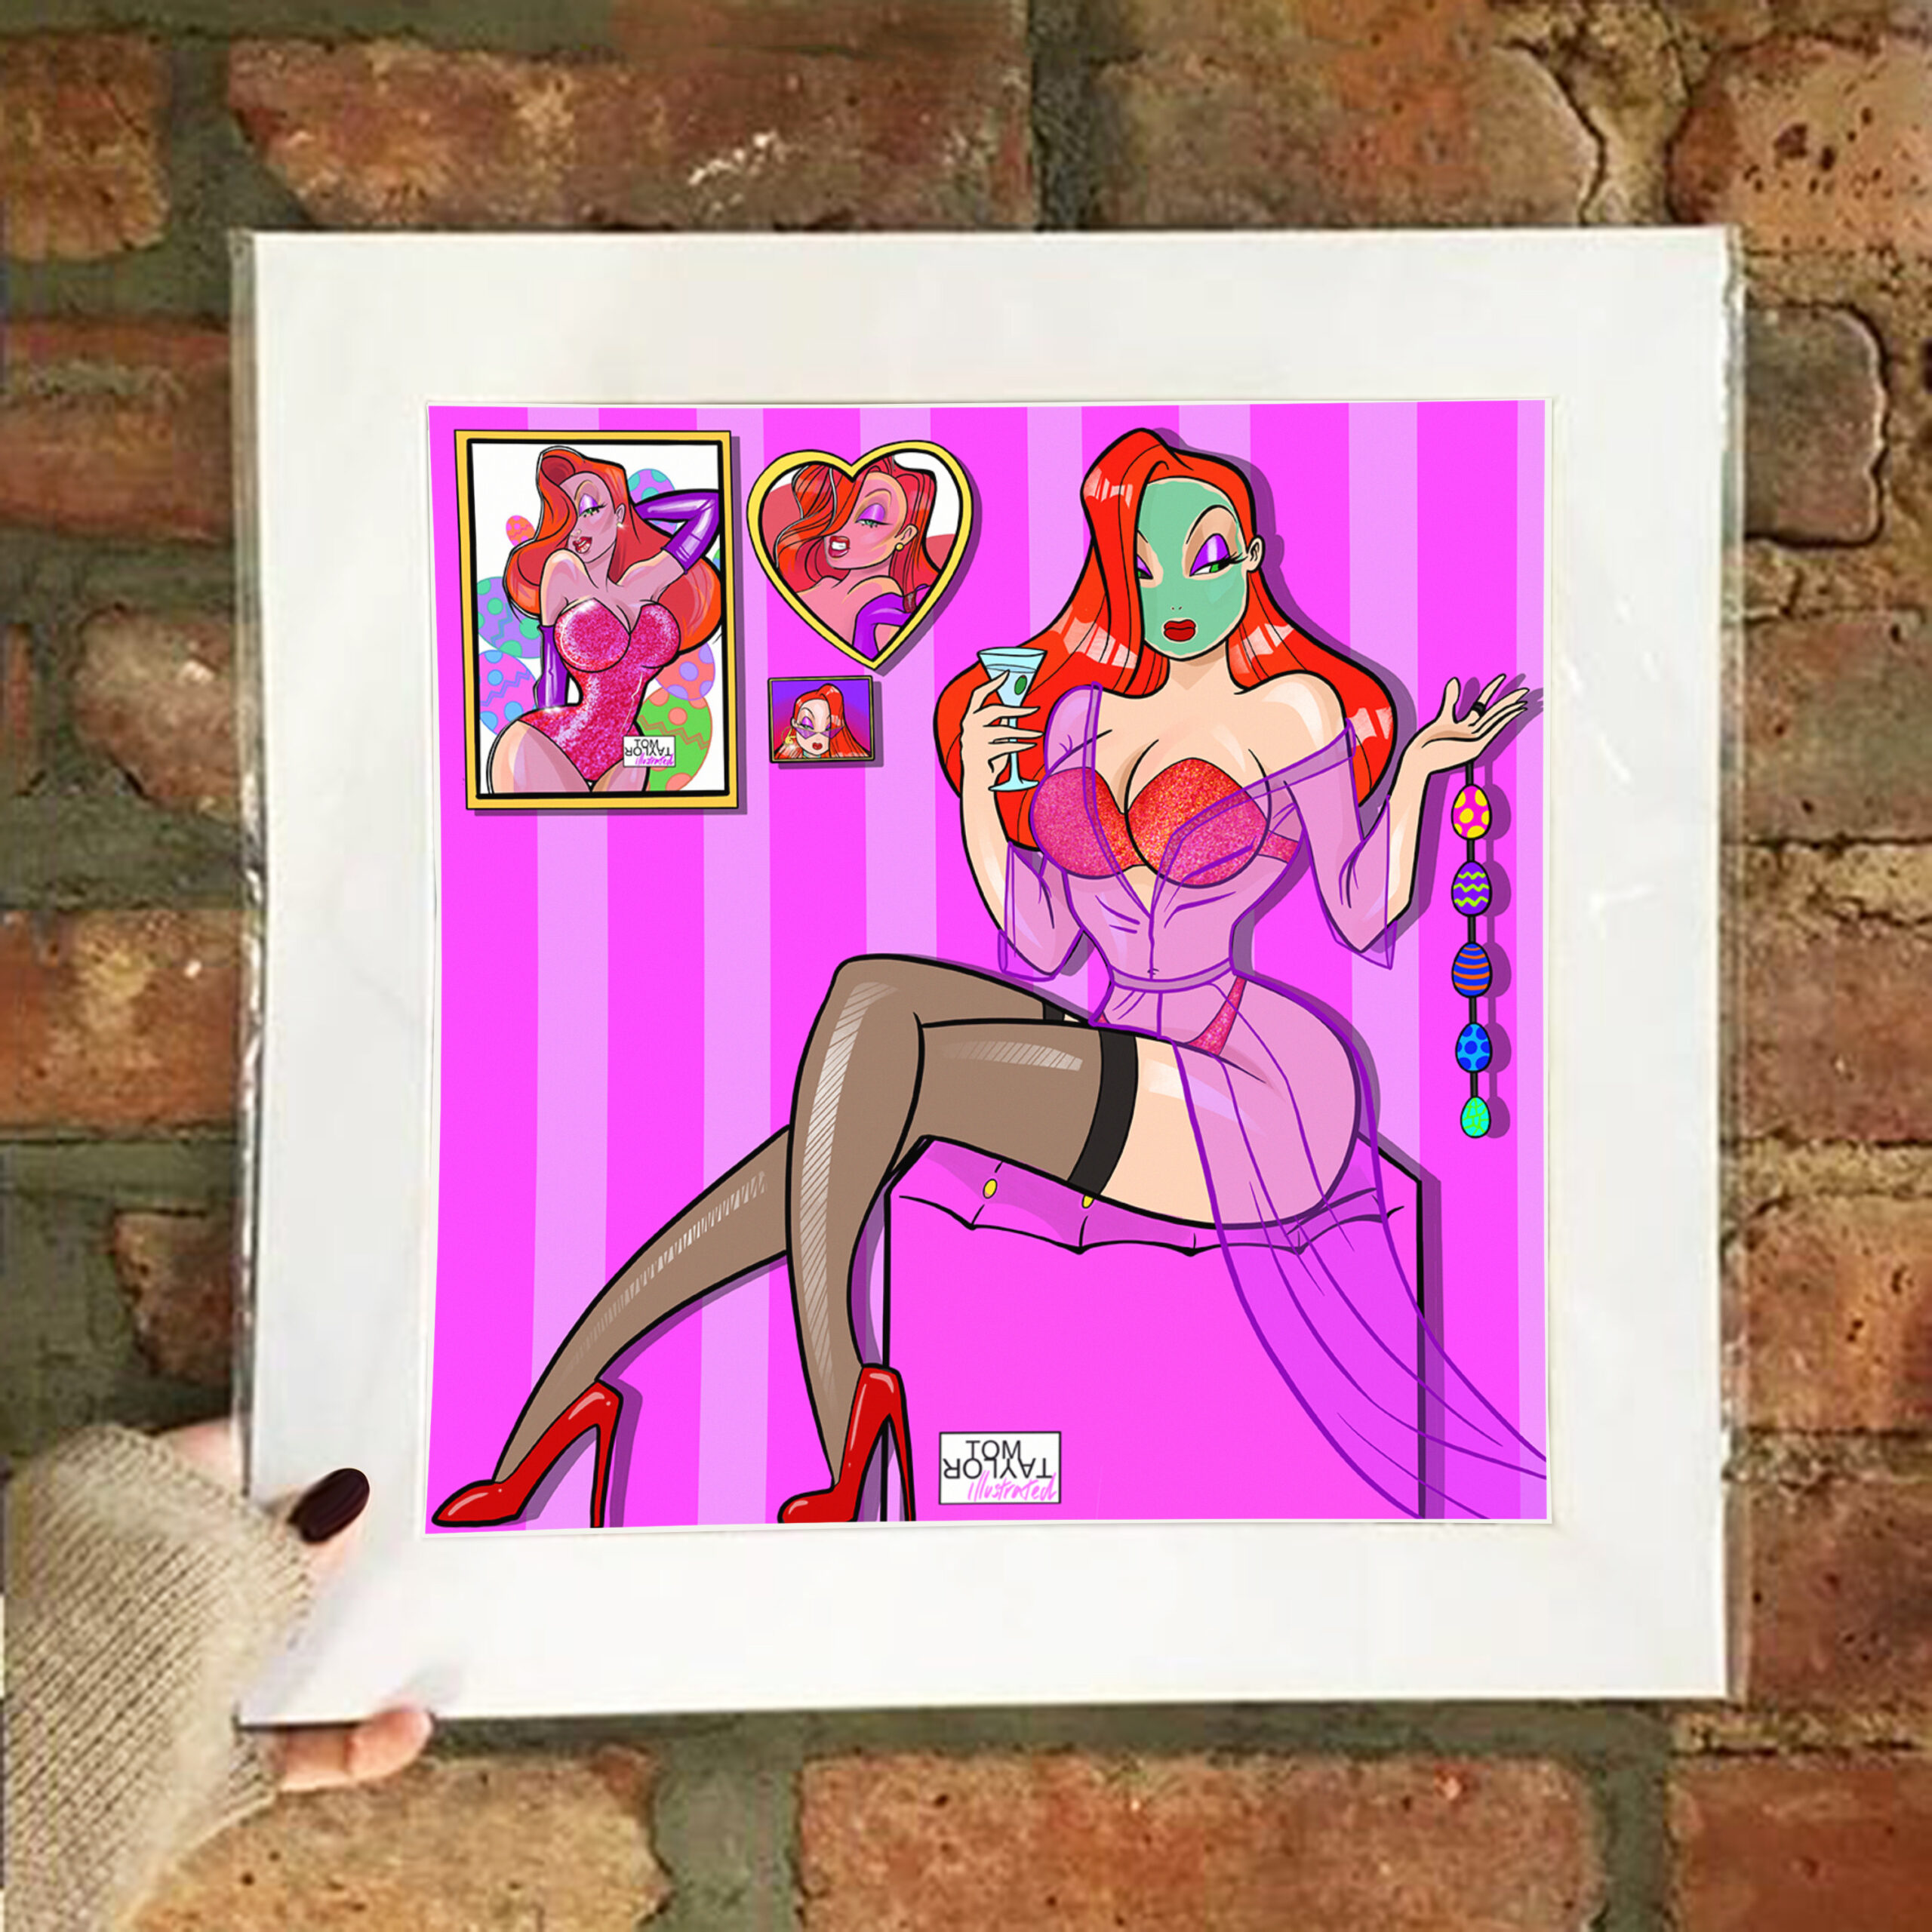 Special Edition Jessica Rabbit scaled